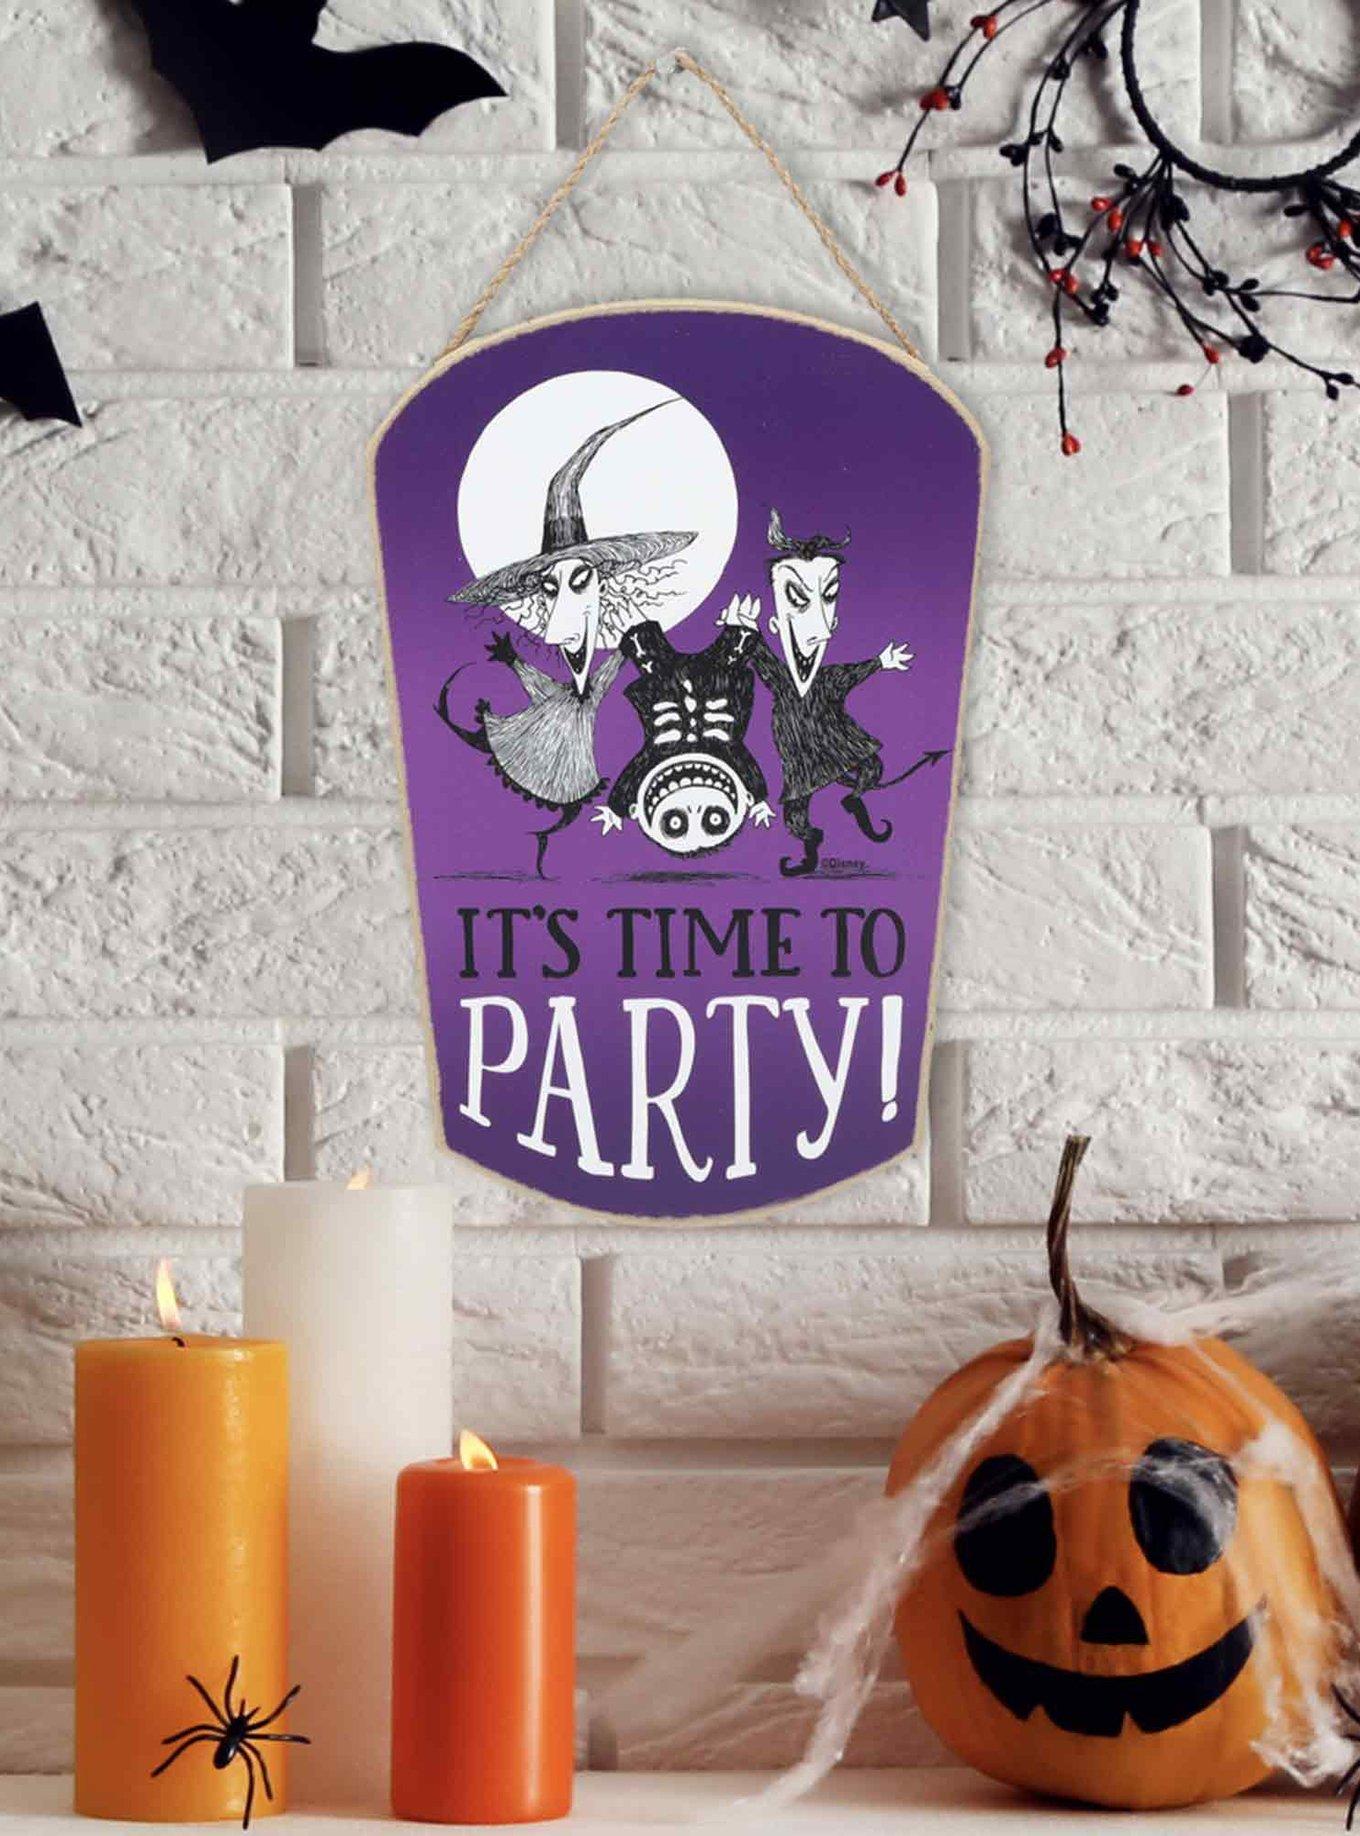 The Nightmare Before Christmas Party Lock, Shock, and Barrel Hanging Wood Wall Decor